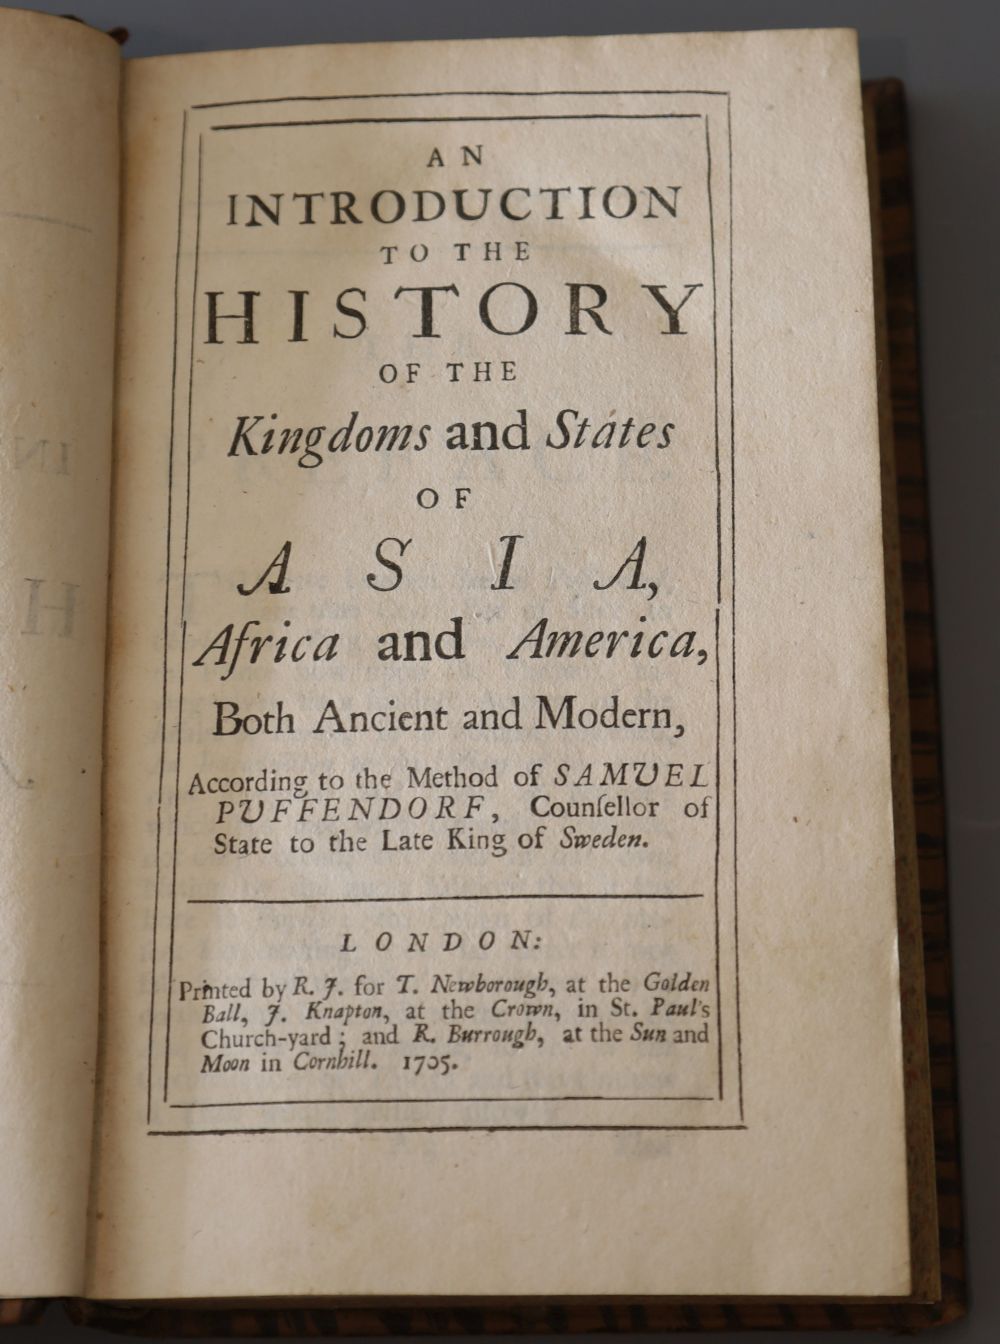 [Crull, Jacodus] - Introduction to the history of the Kingdoms and States of Asia, calf, 8vo, R.J. and T. Newborough, London, 1705